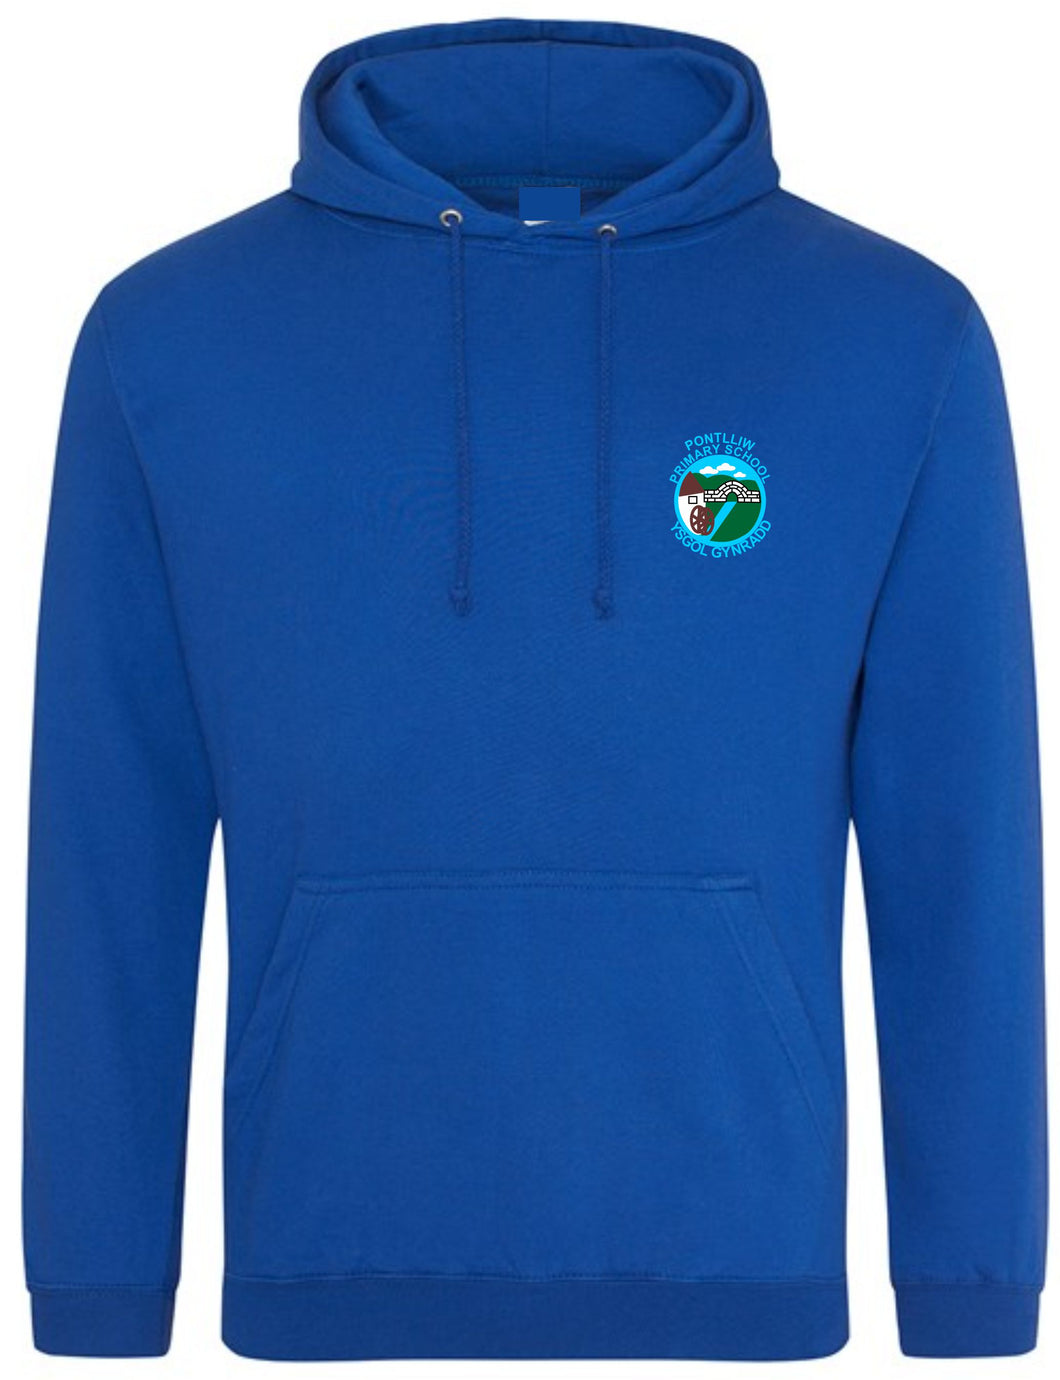 Pontlliw Primary Unisex (OVERHEAD) (ROYAL BLUE) Leaver Hood 2024 (NON REFUNDABLE ITEM NO EXCHANGES)